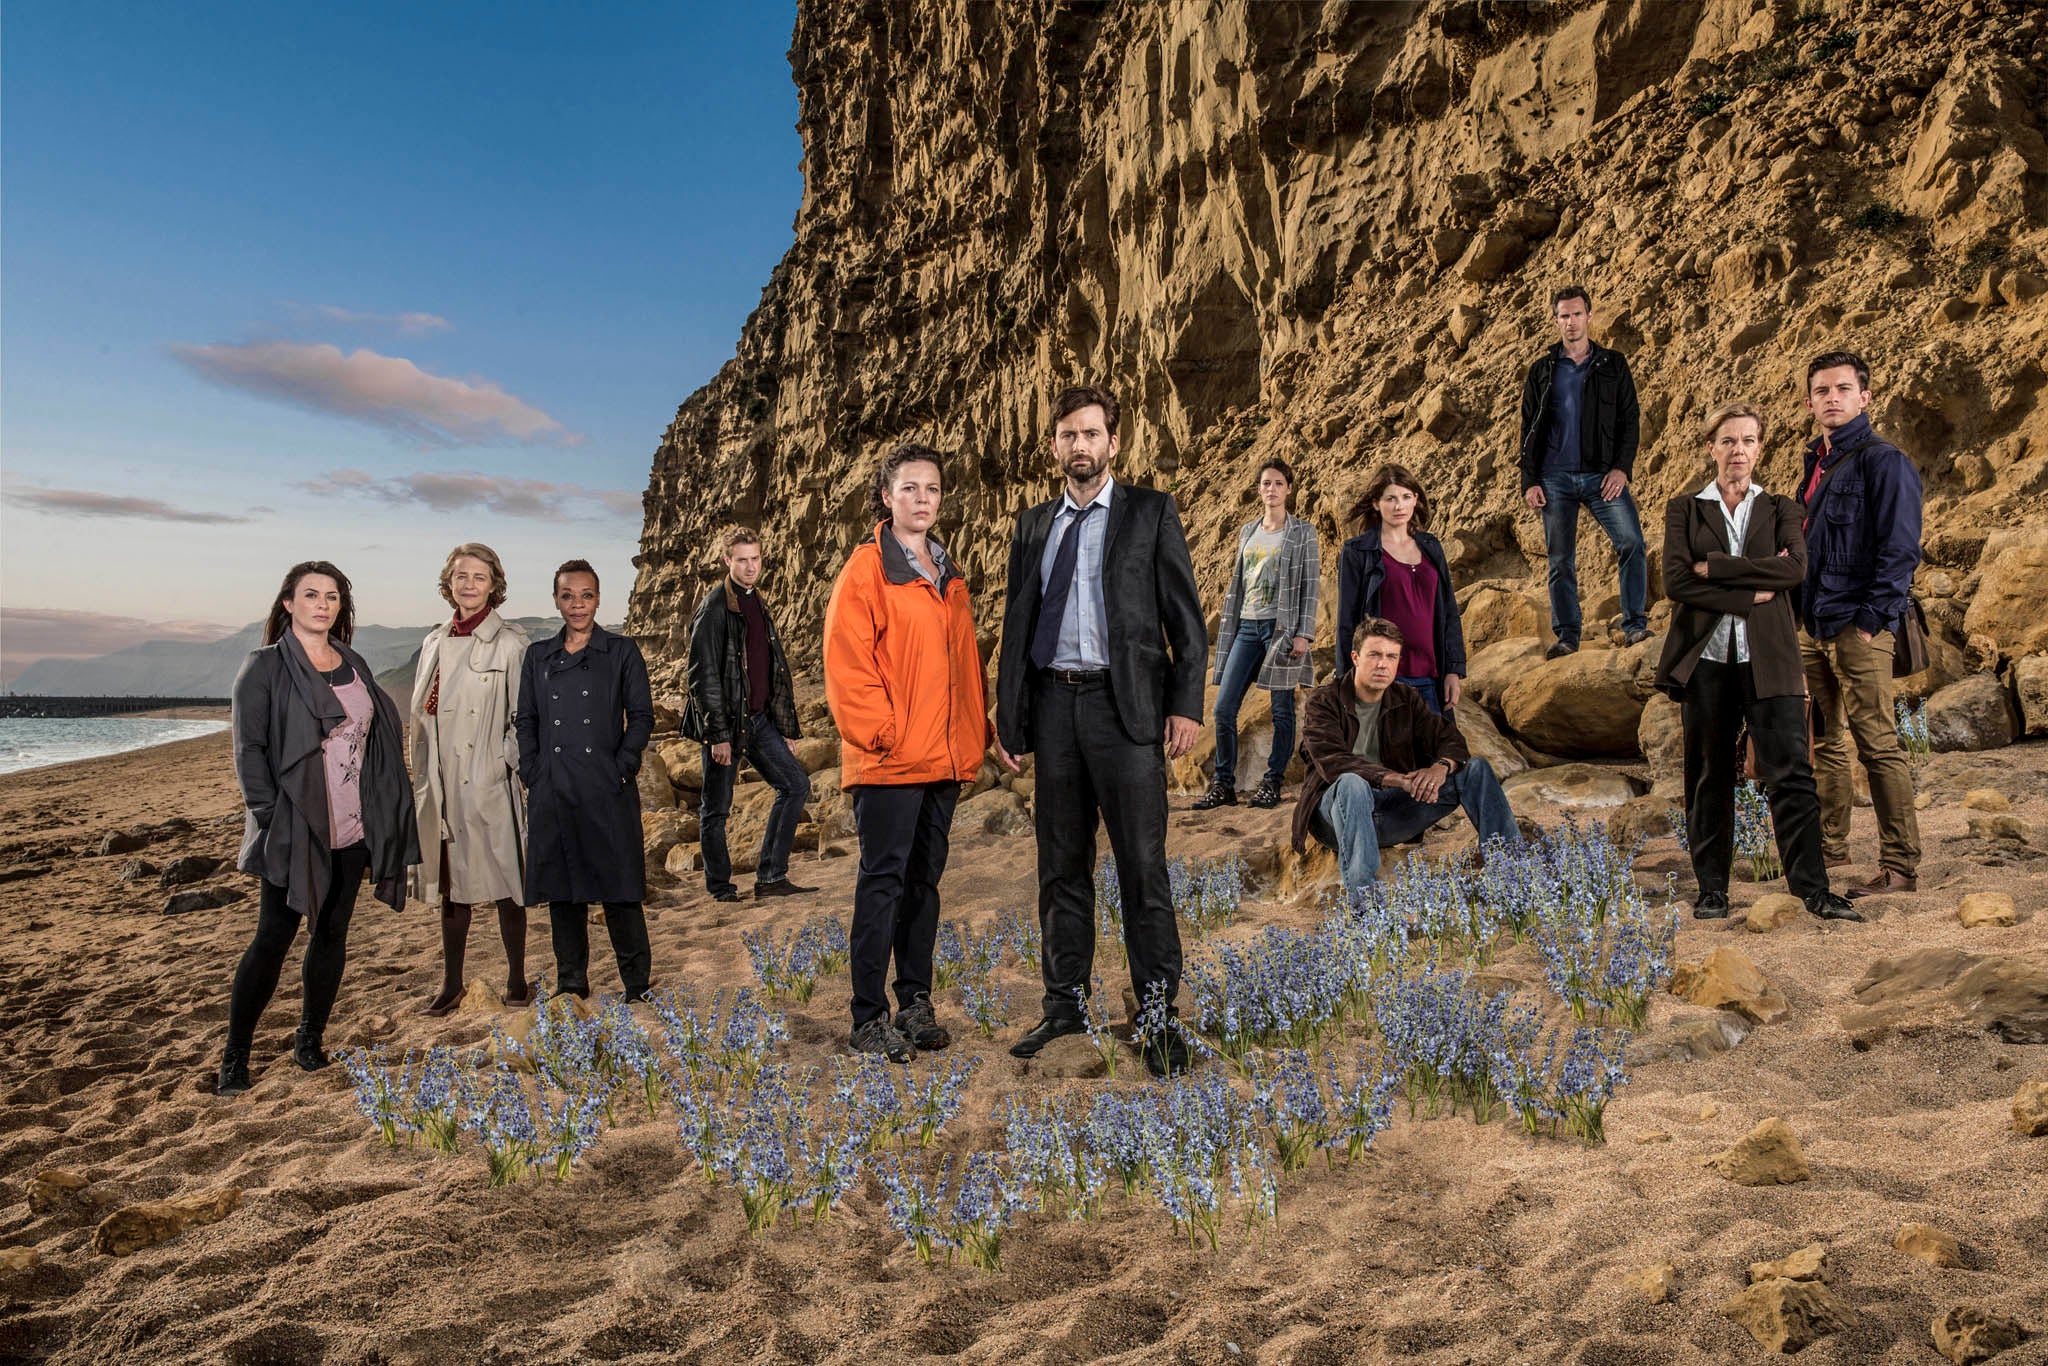 Broadchurch series 2: The full cast